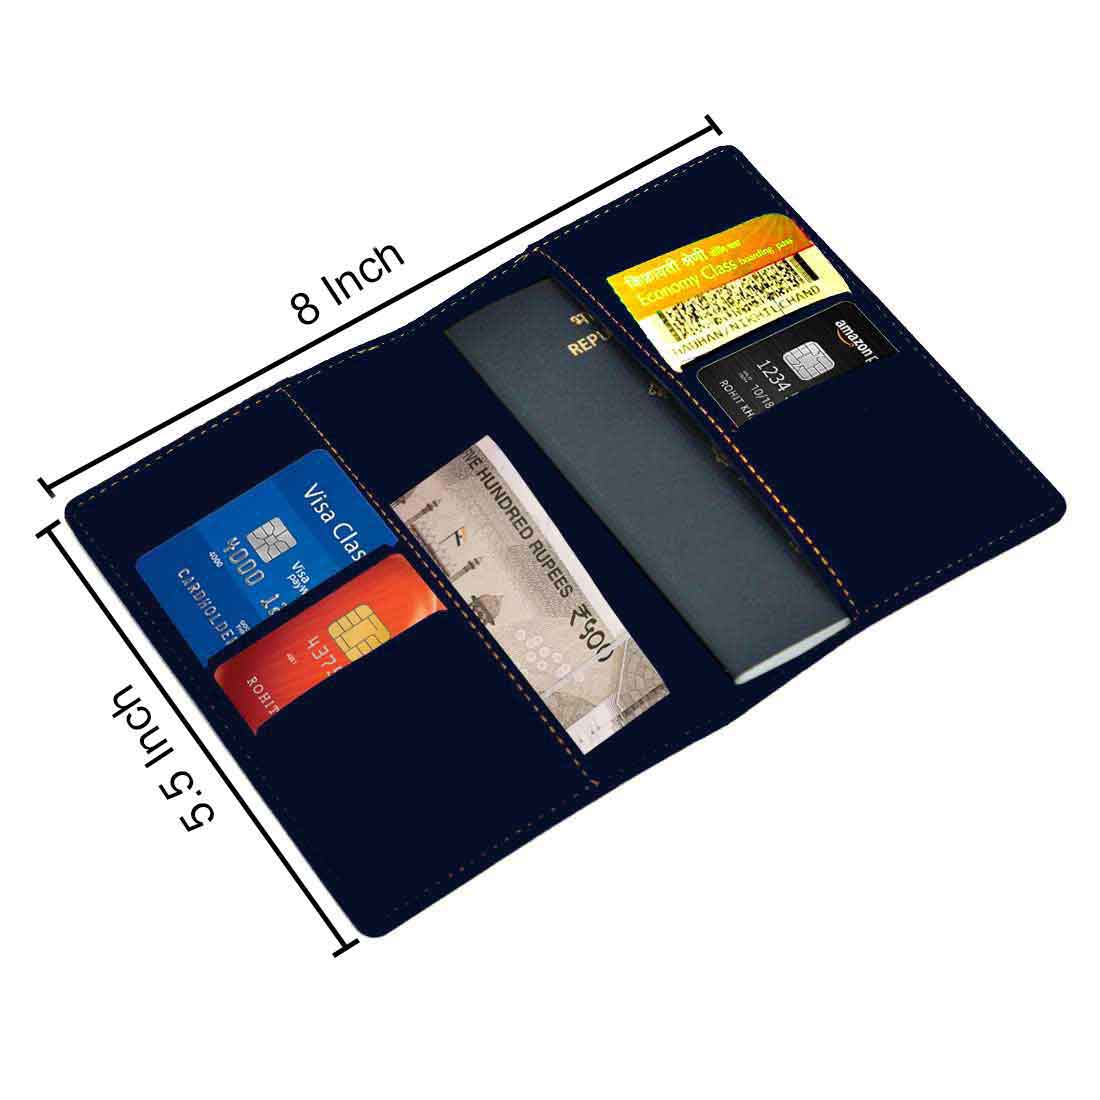 Passport Holder for Men PU Leather Custom Covers for Passports